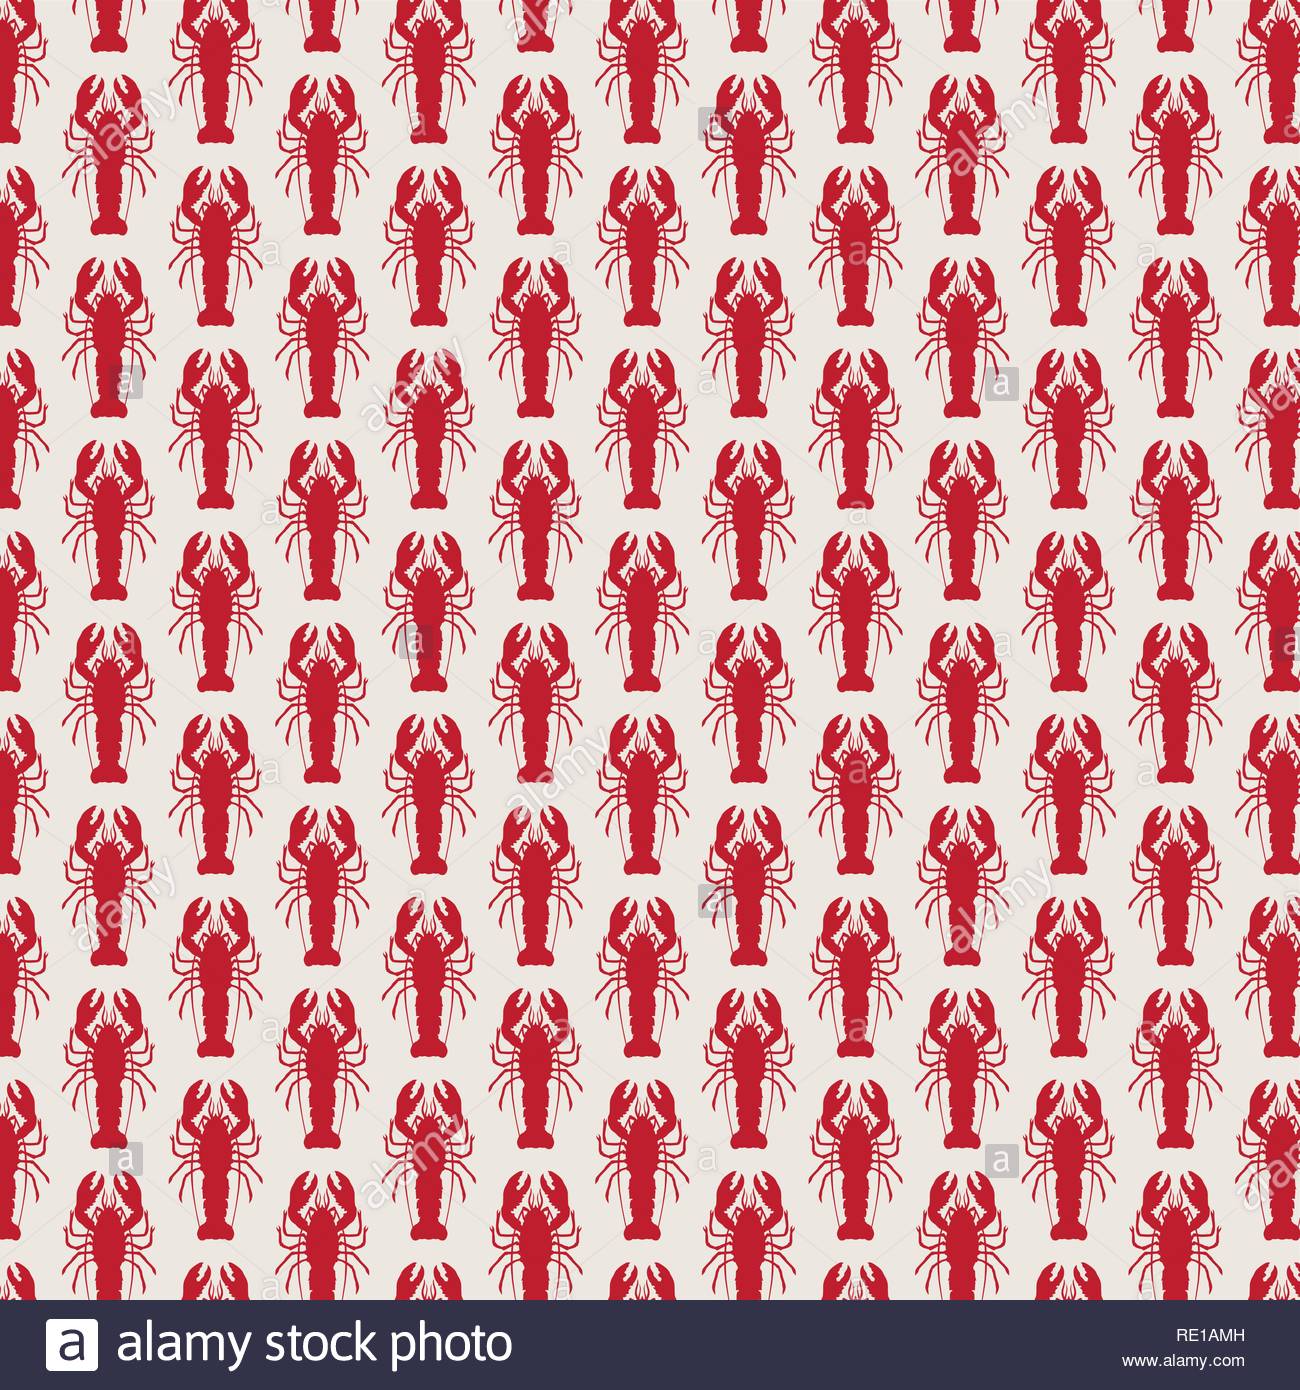 Lobster Vector Seamless Red Repeat For Any Use On Light Brown